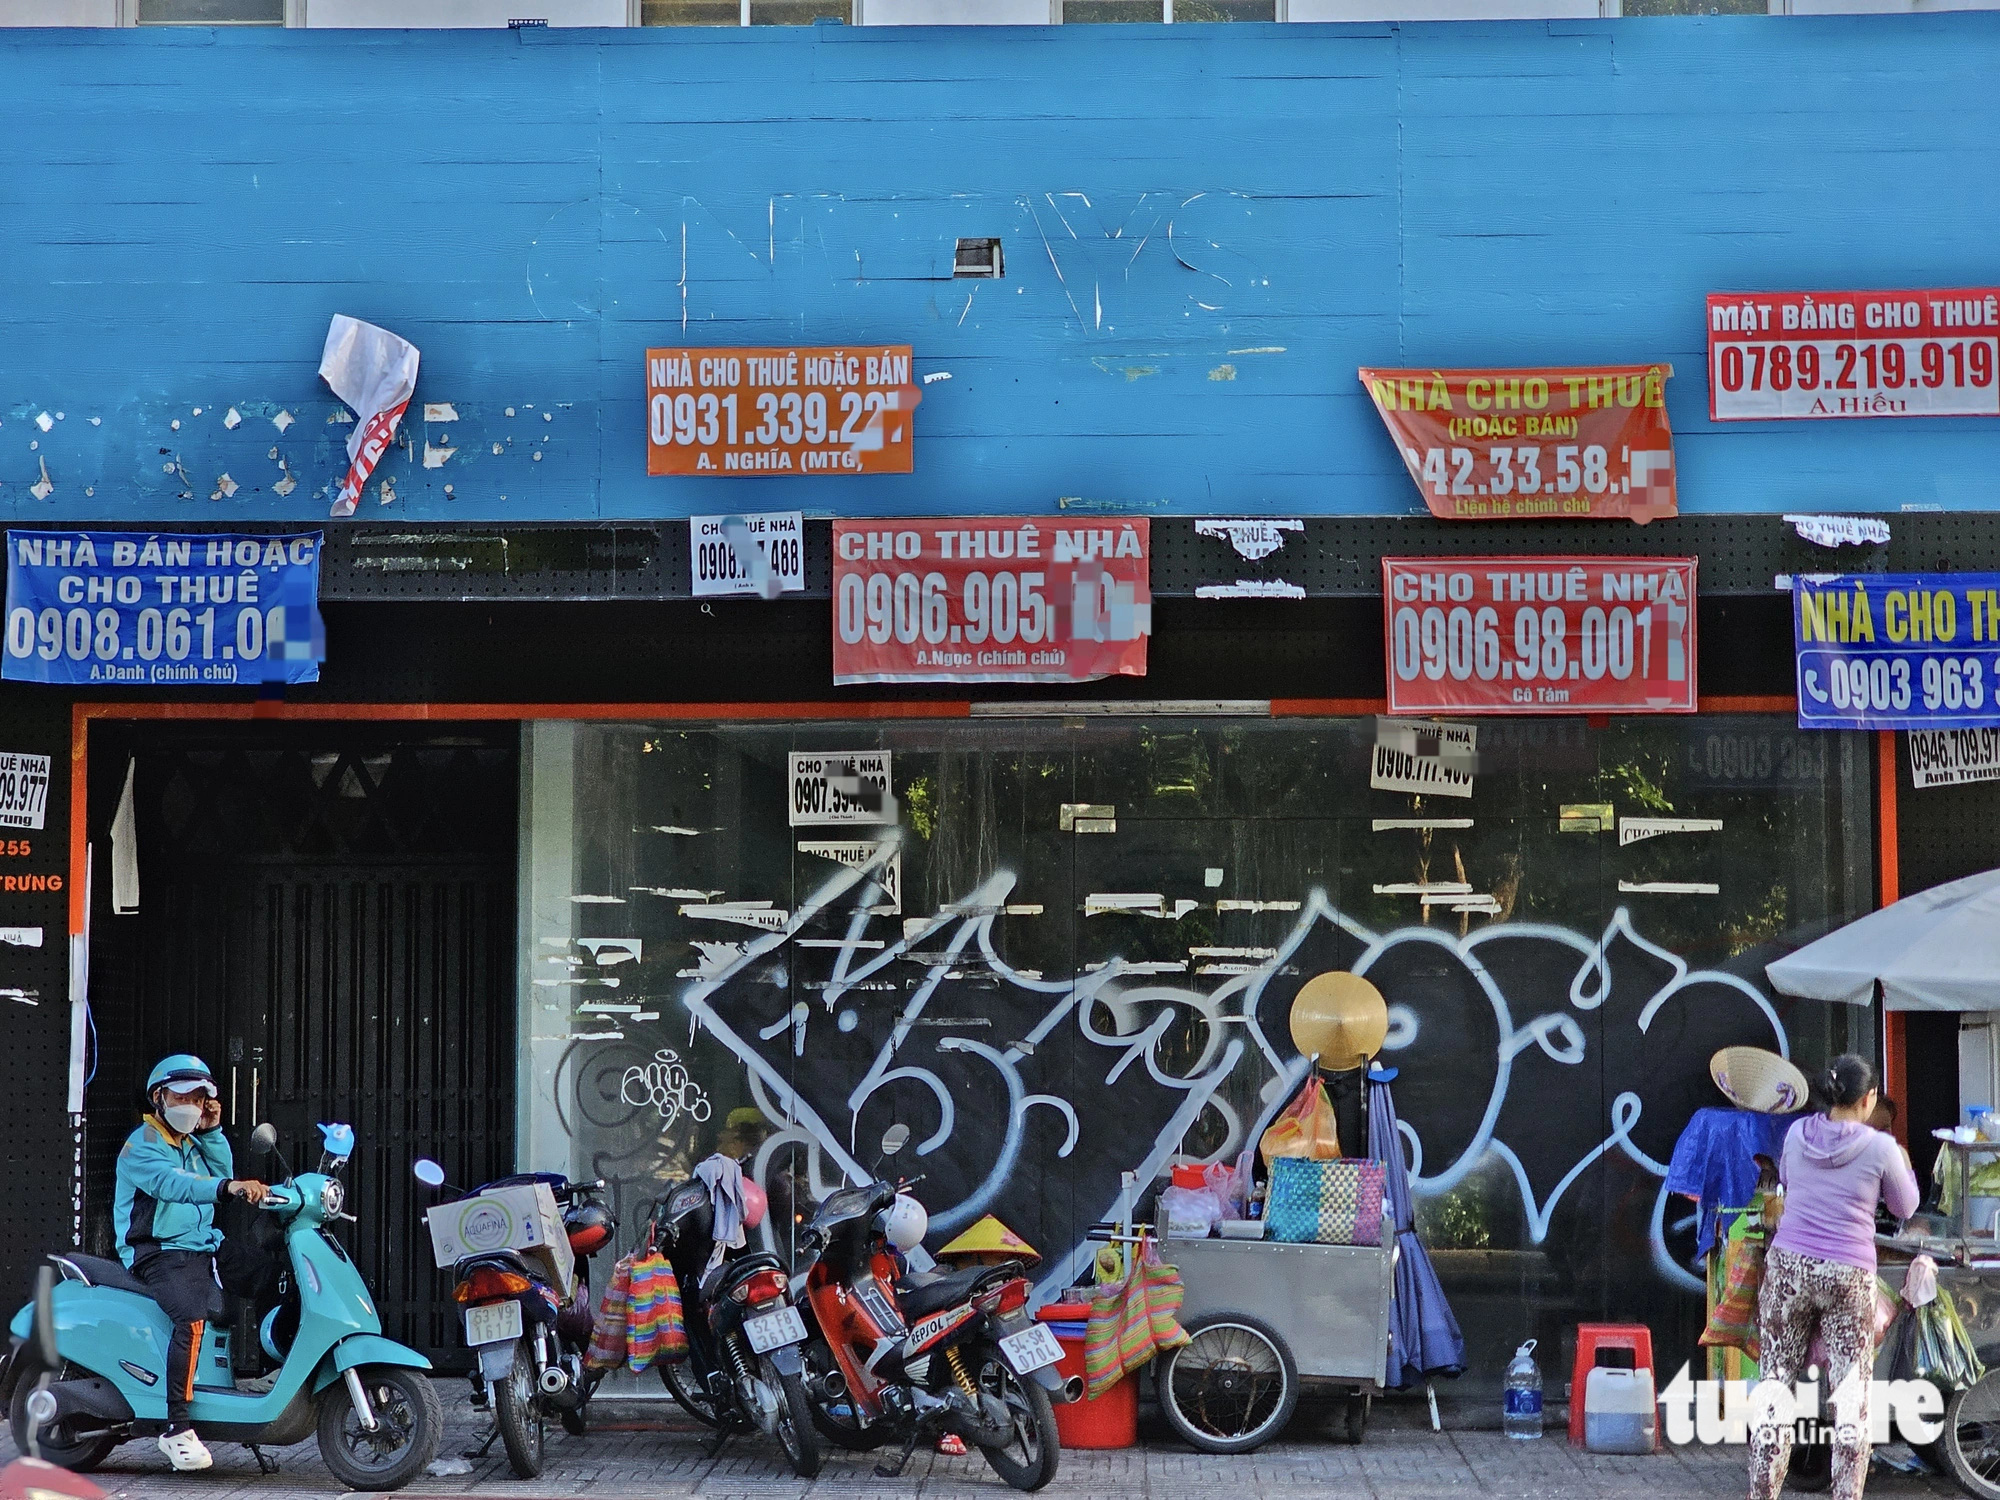 A vibrant marketplace emerges for street vendors in front of a vacant retail premises on Hai Ba Trung Street in District 3, Ho Chi Minh City. Photo: Ngoc Hien / Tuoi Tre